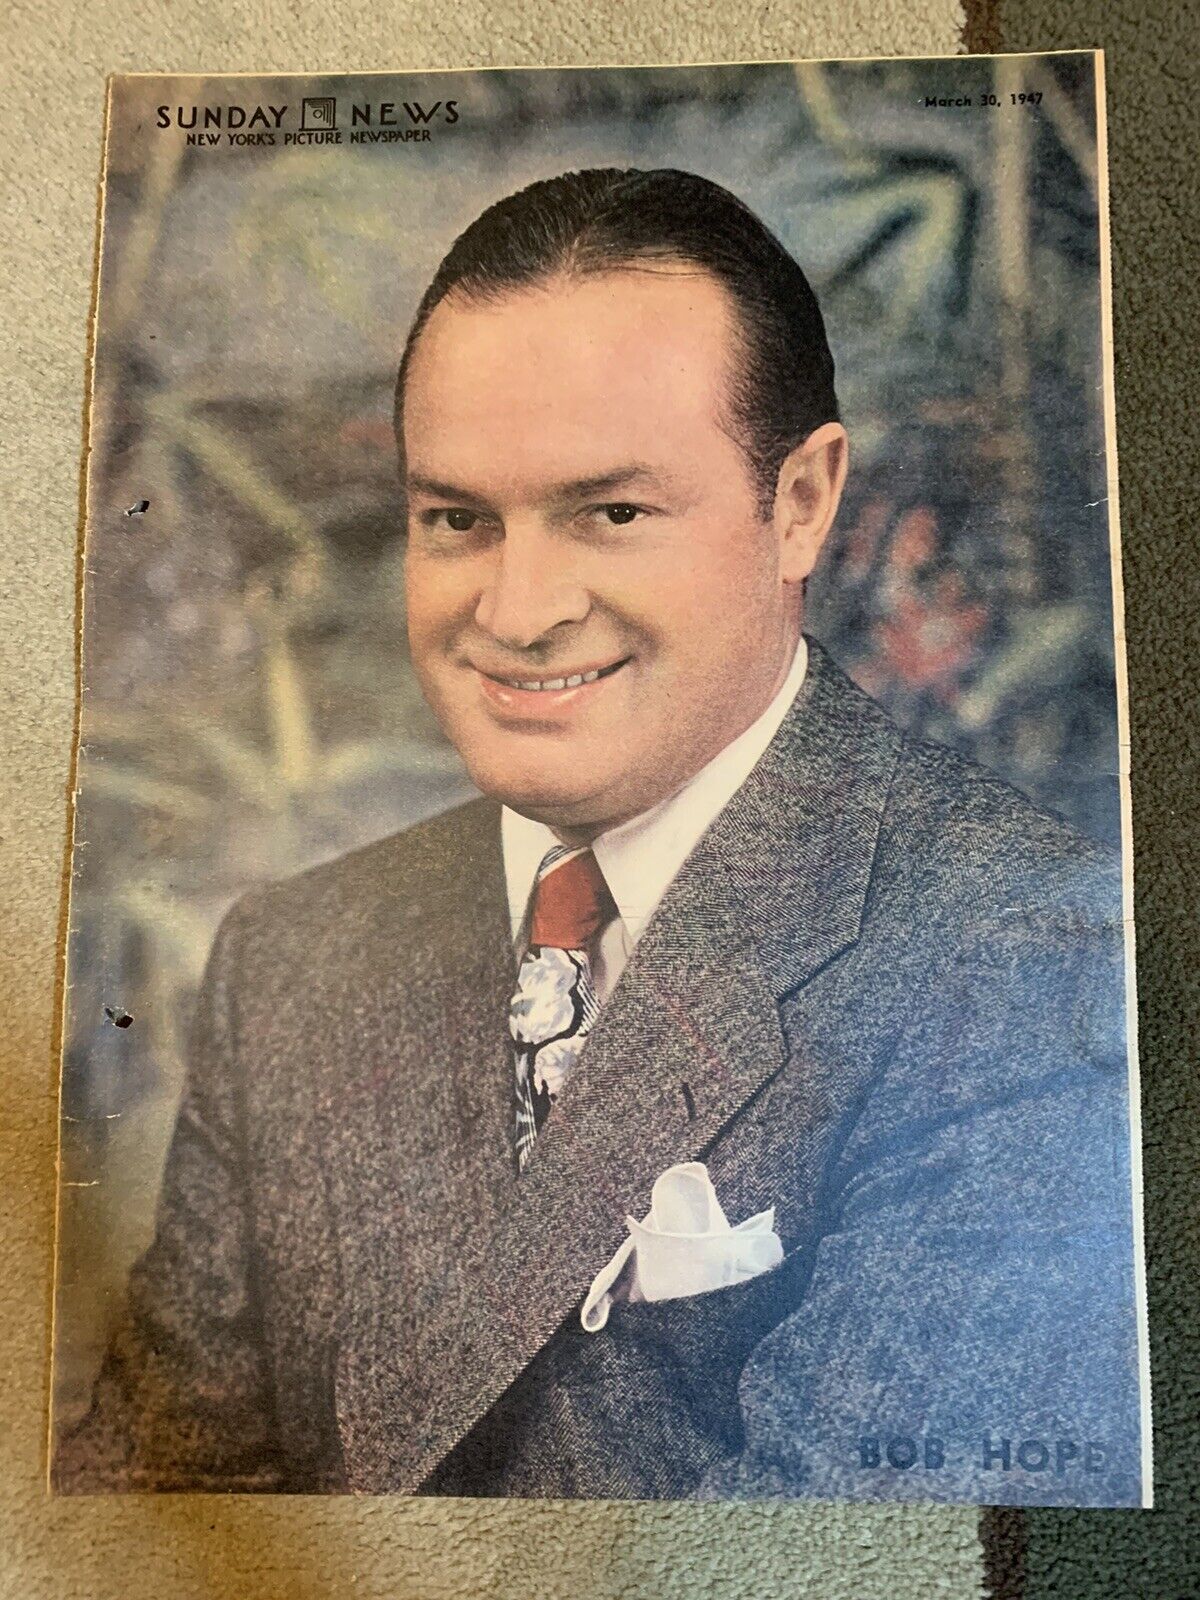 BOB HOPE SUNDAY NEWS MARCH 30 1947 New York Picture Newspaper  single page